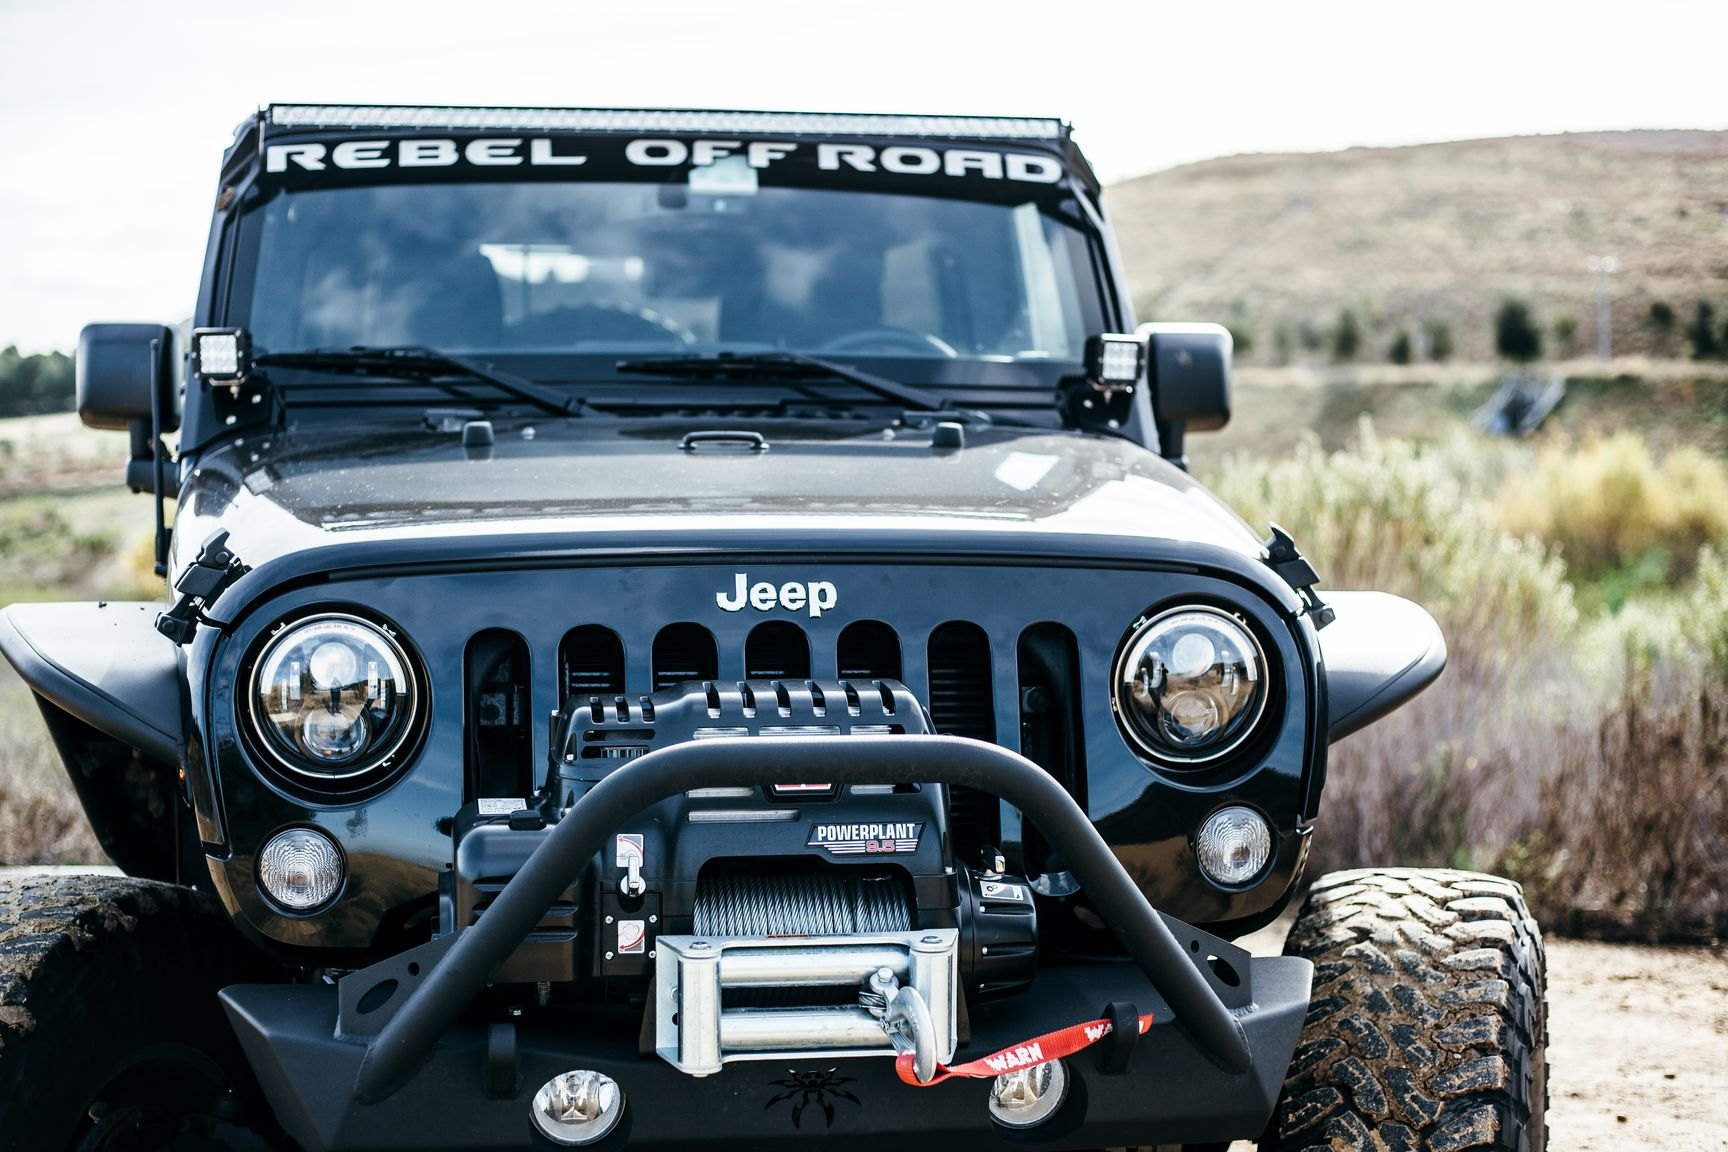 Black Lifted Jeep Wrangler with Poison Spyder Front Bumper - Photo by Rebel Off-Road